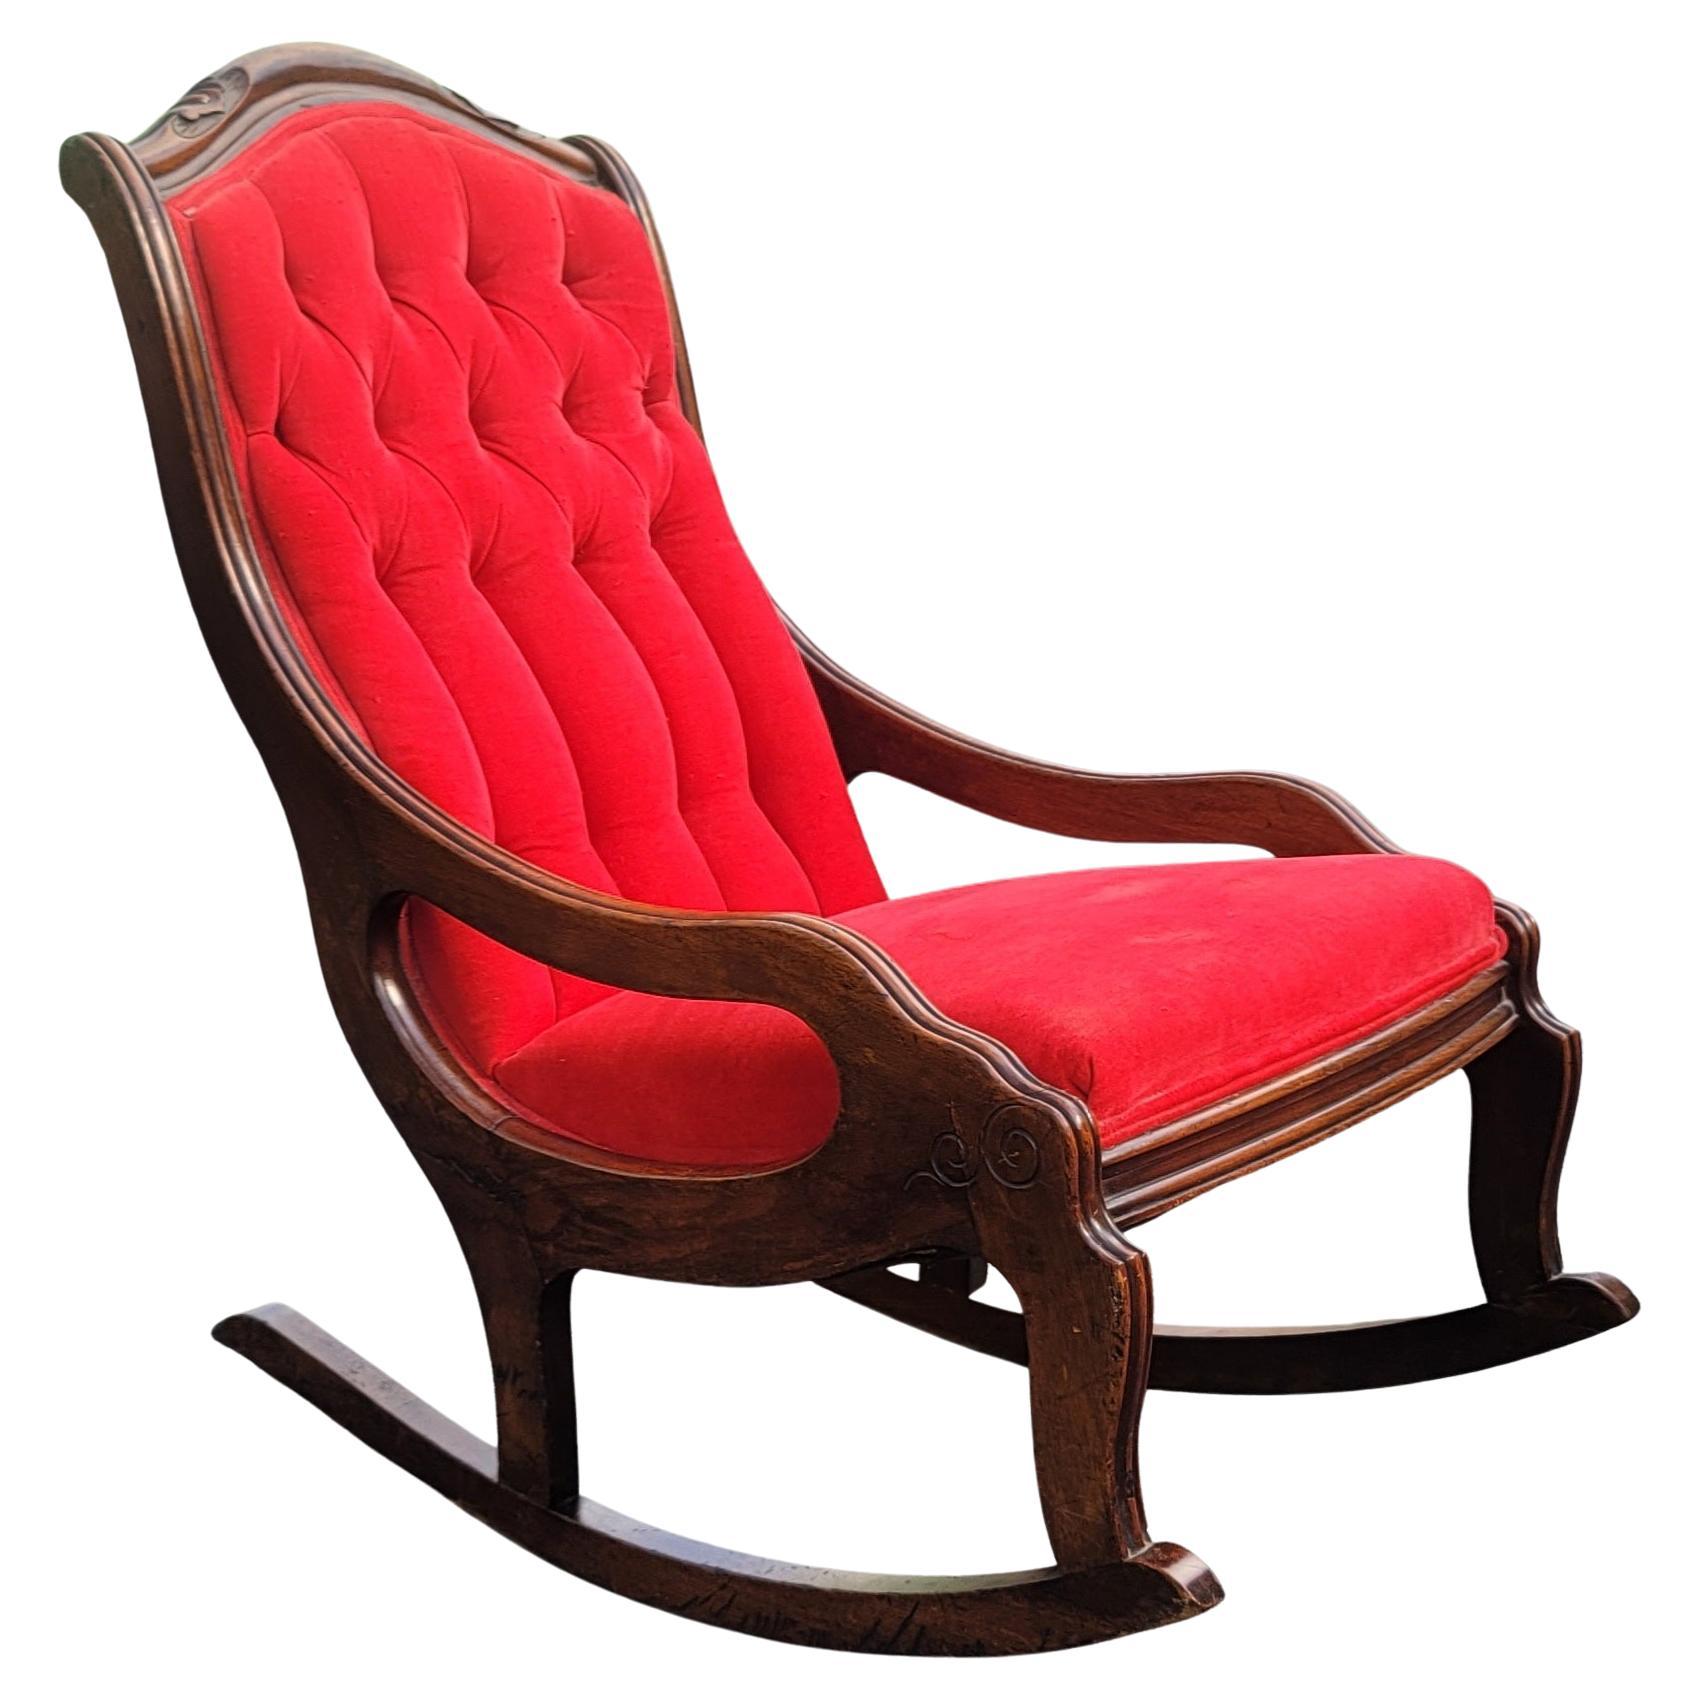 Victorian Mahogany and Tufted Velvet Upholstered Rocking Chair, Circa 1920s For Sale